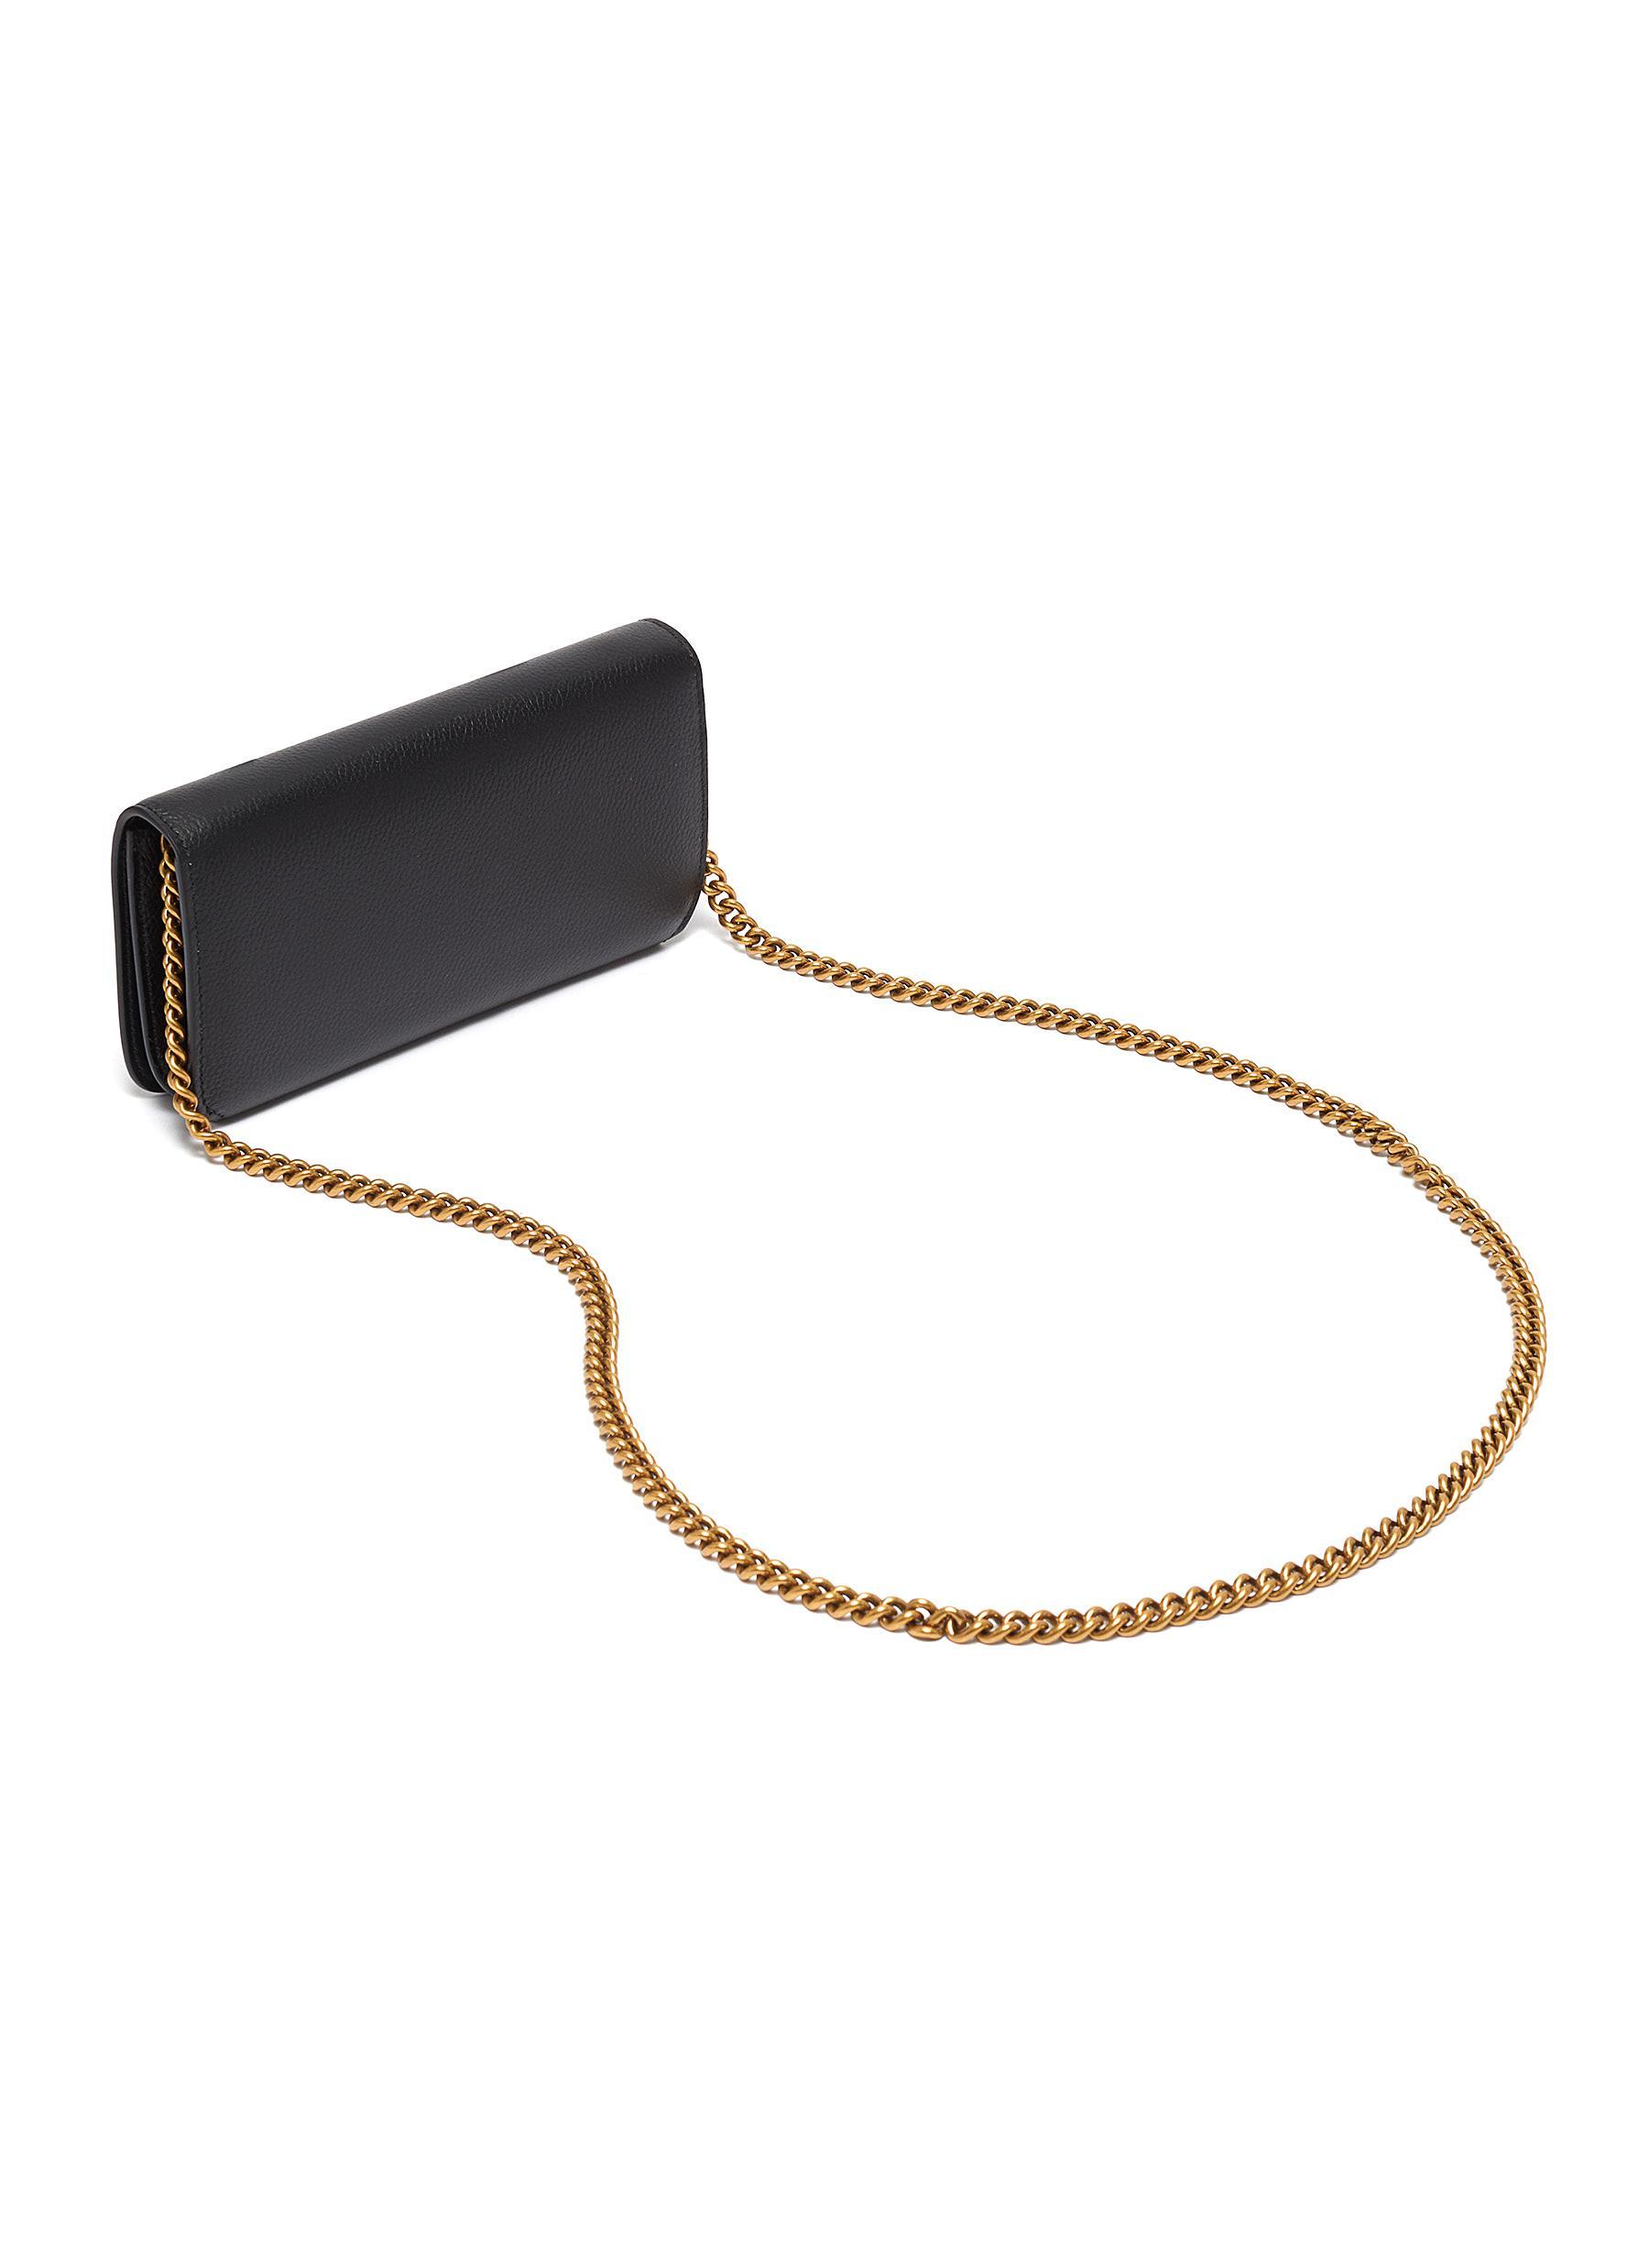 Balenciaga 'cash Continental' Leather Wallet On Chain in Black | Lyst